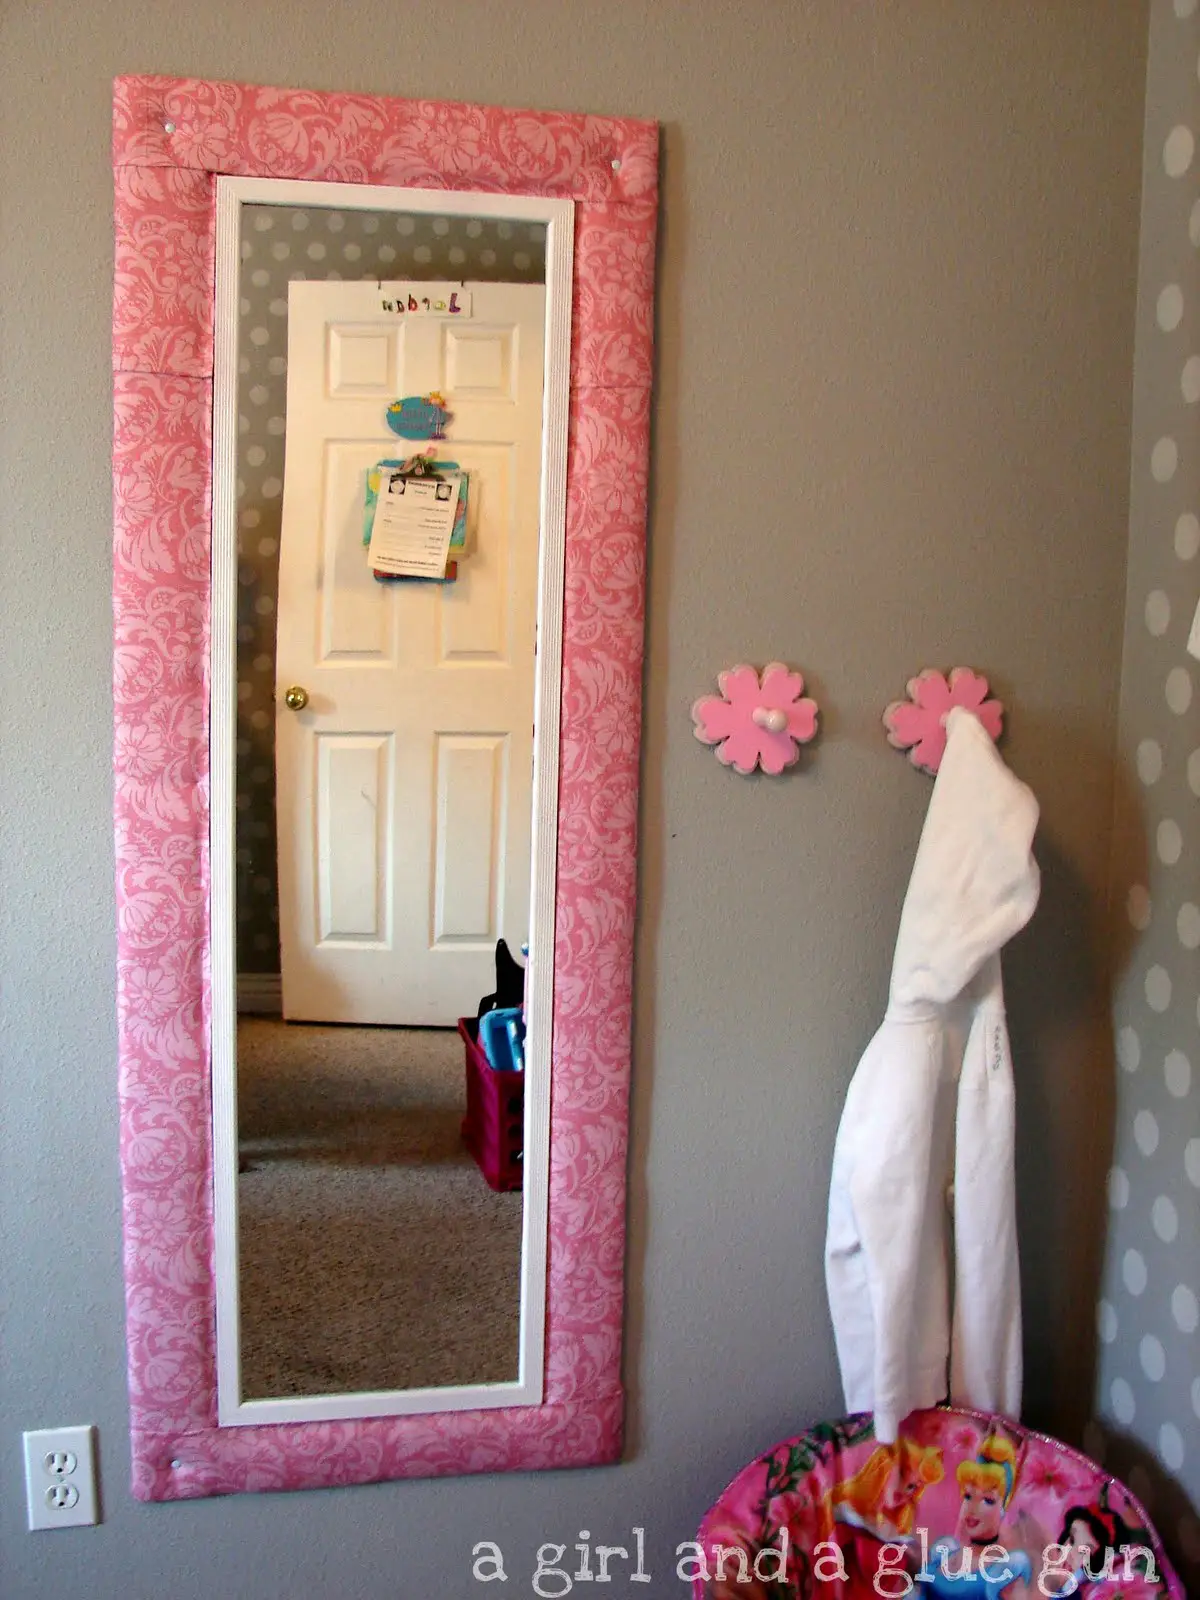 How To Glue Mirror To Wall